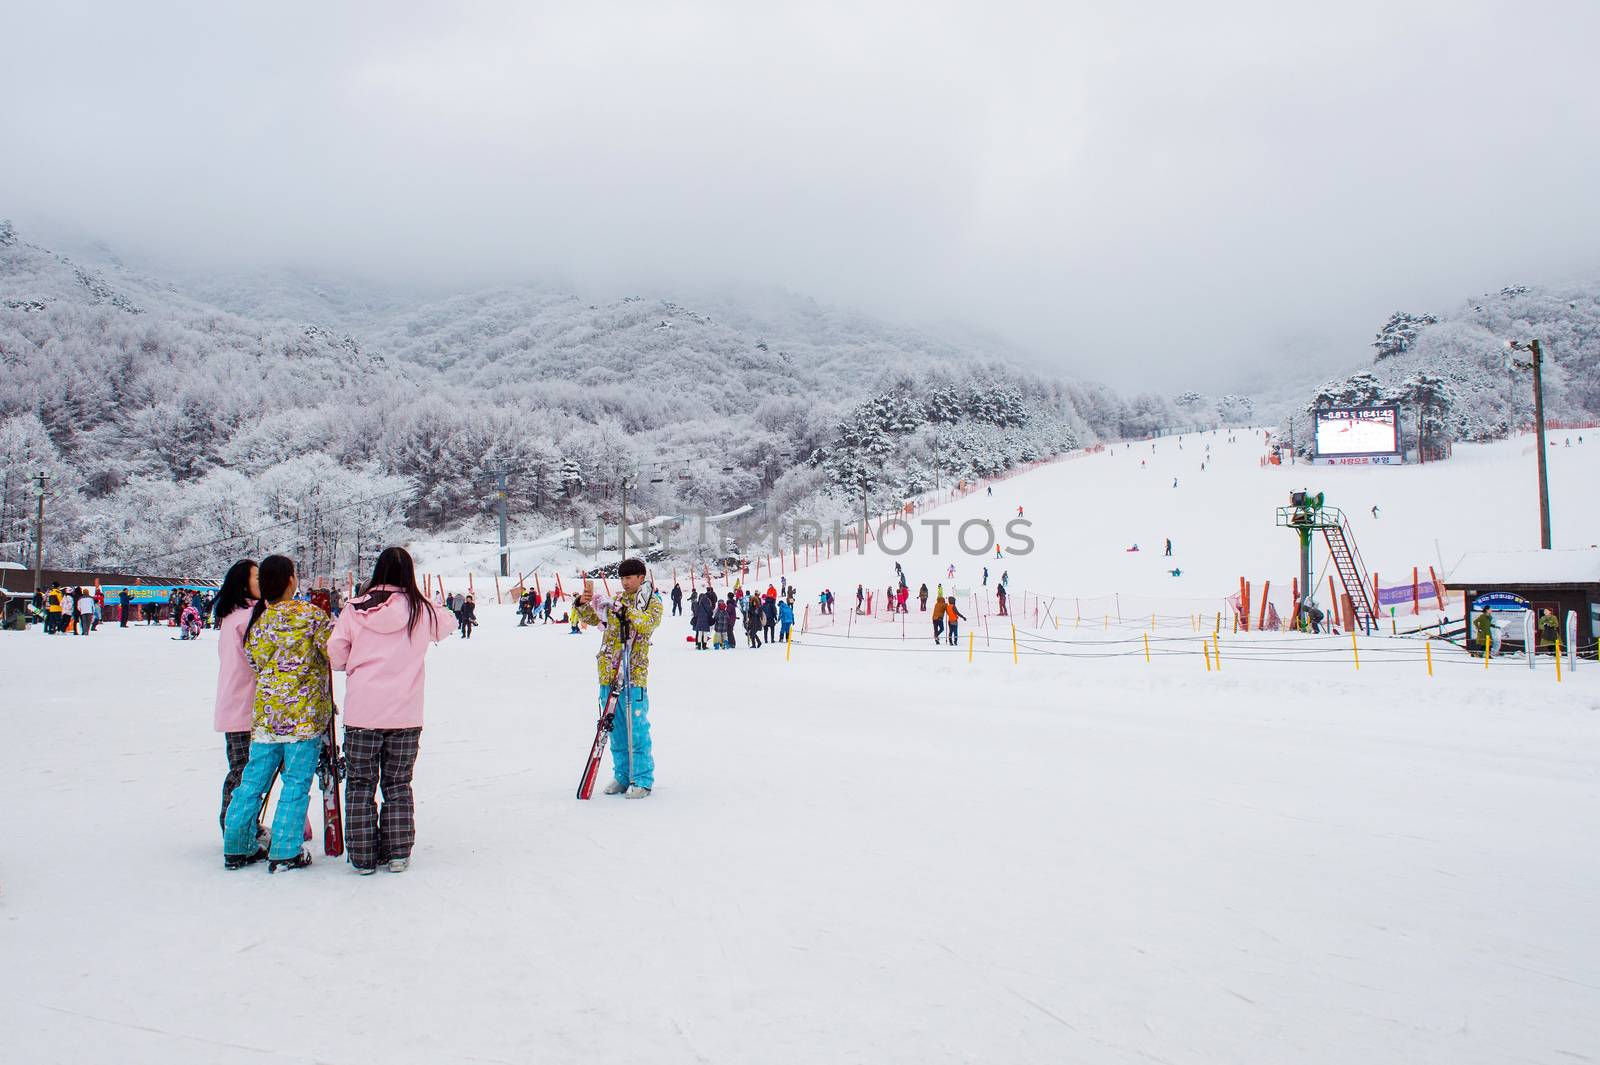 Skiers and Tourists in Deogyusan Ski Resort on Deogyusan mountains,South Korea. by gutarphotoghaphy